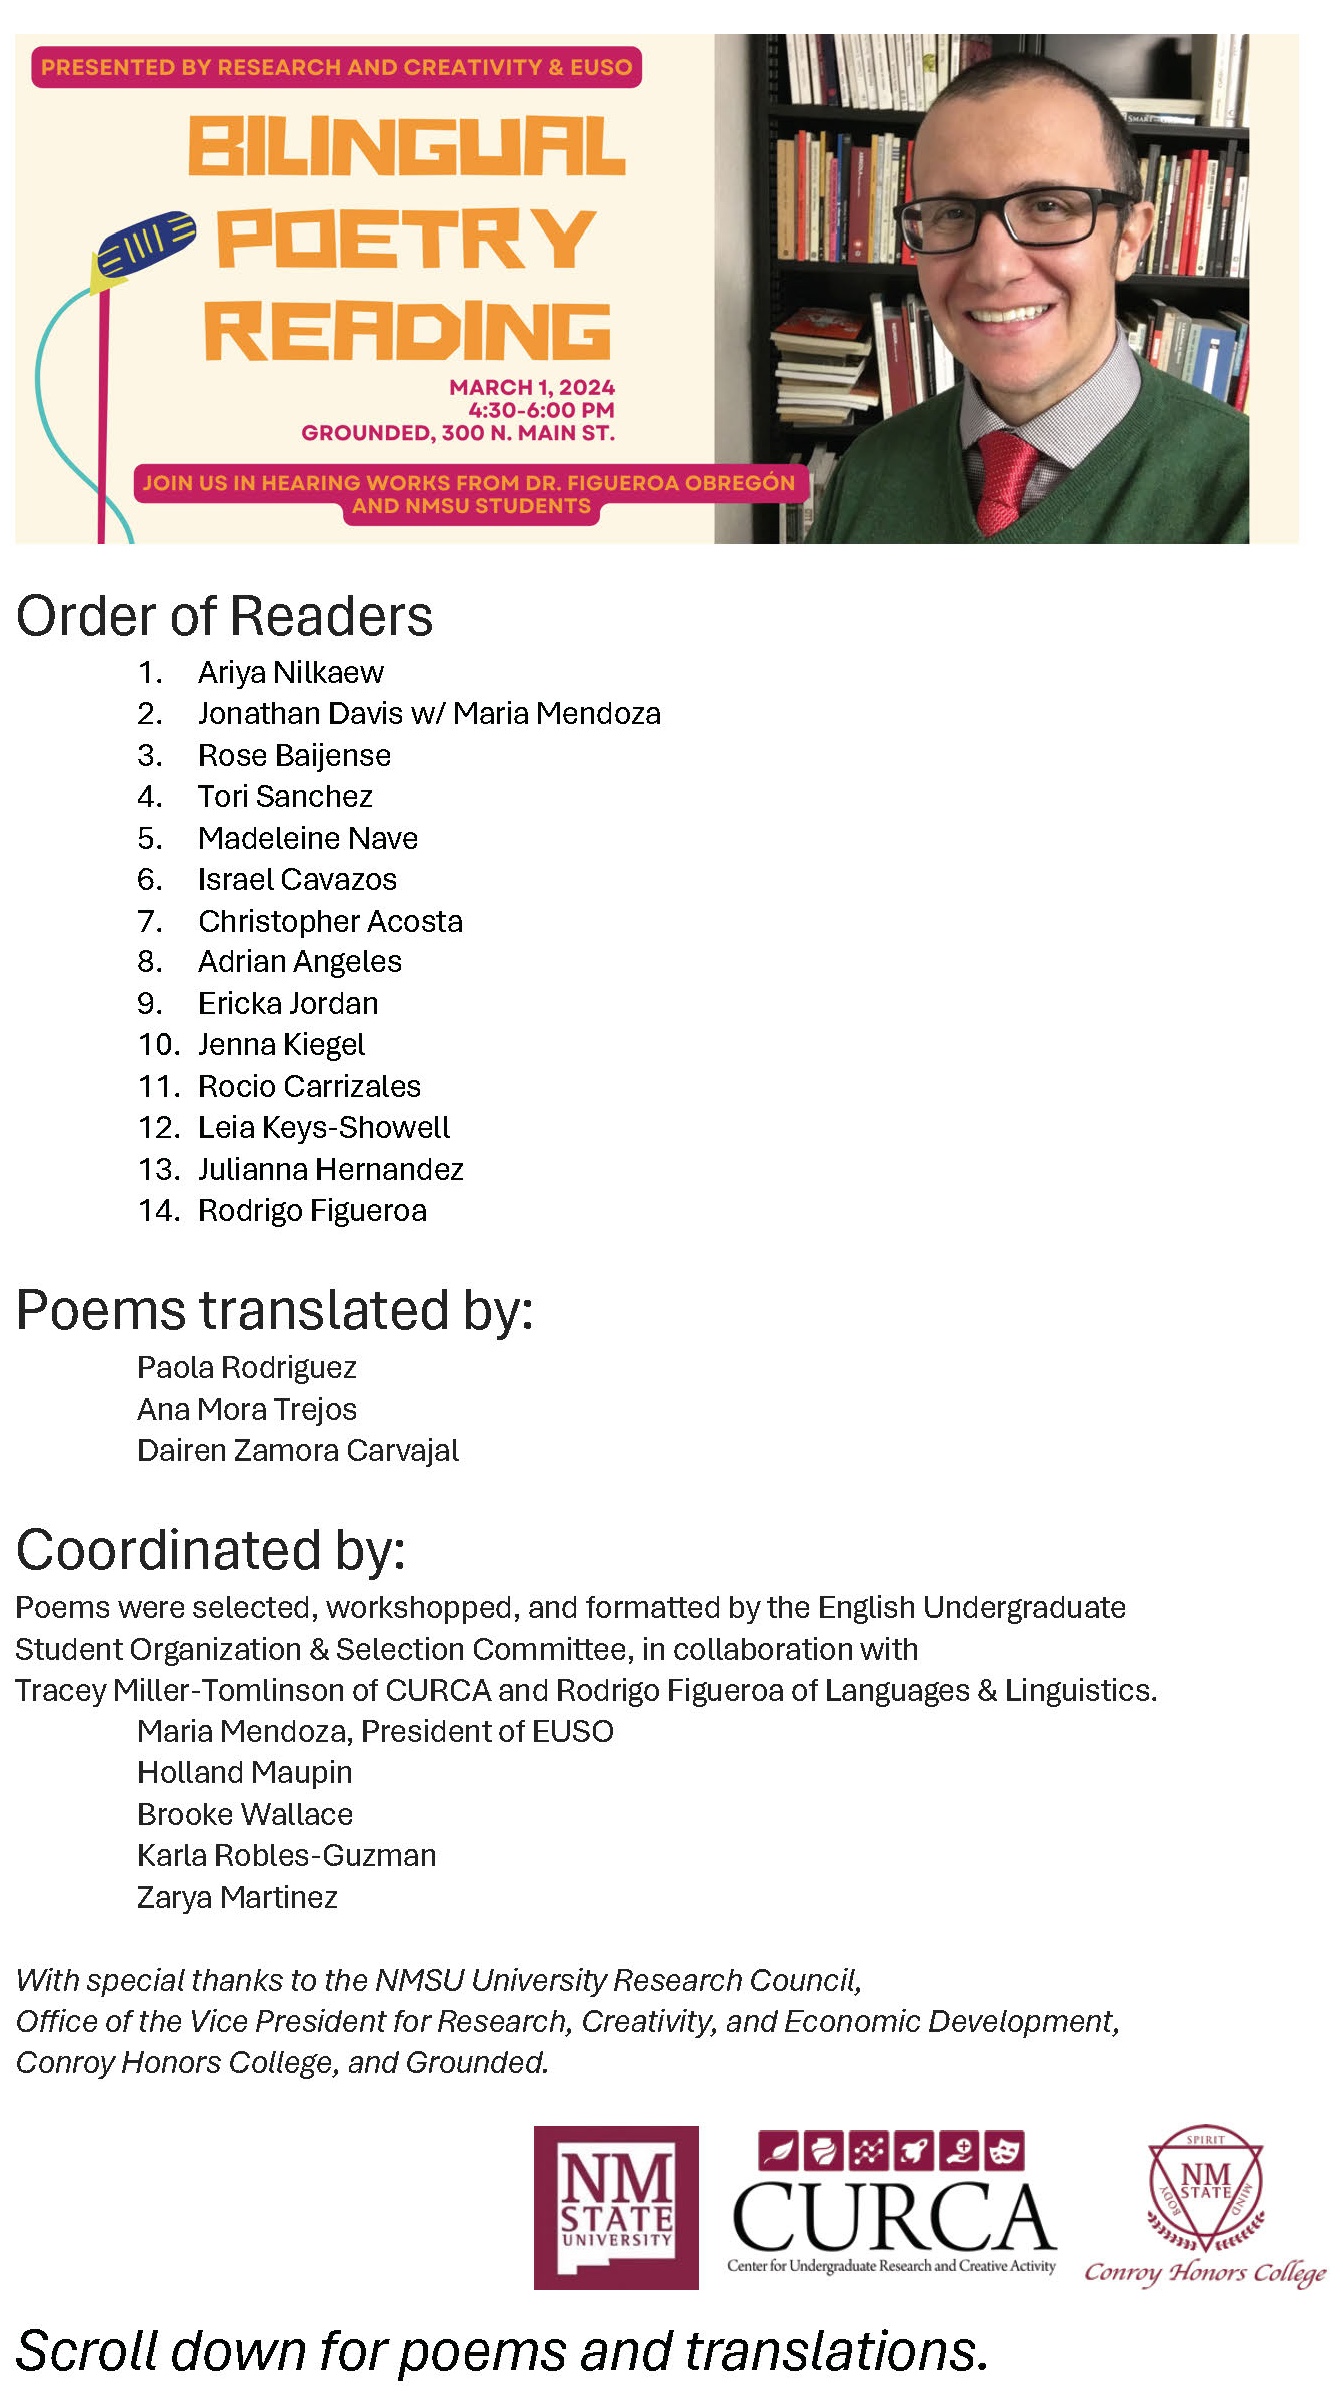 Program for Bilingual Poetry Reading on March 1, 2024.